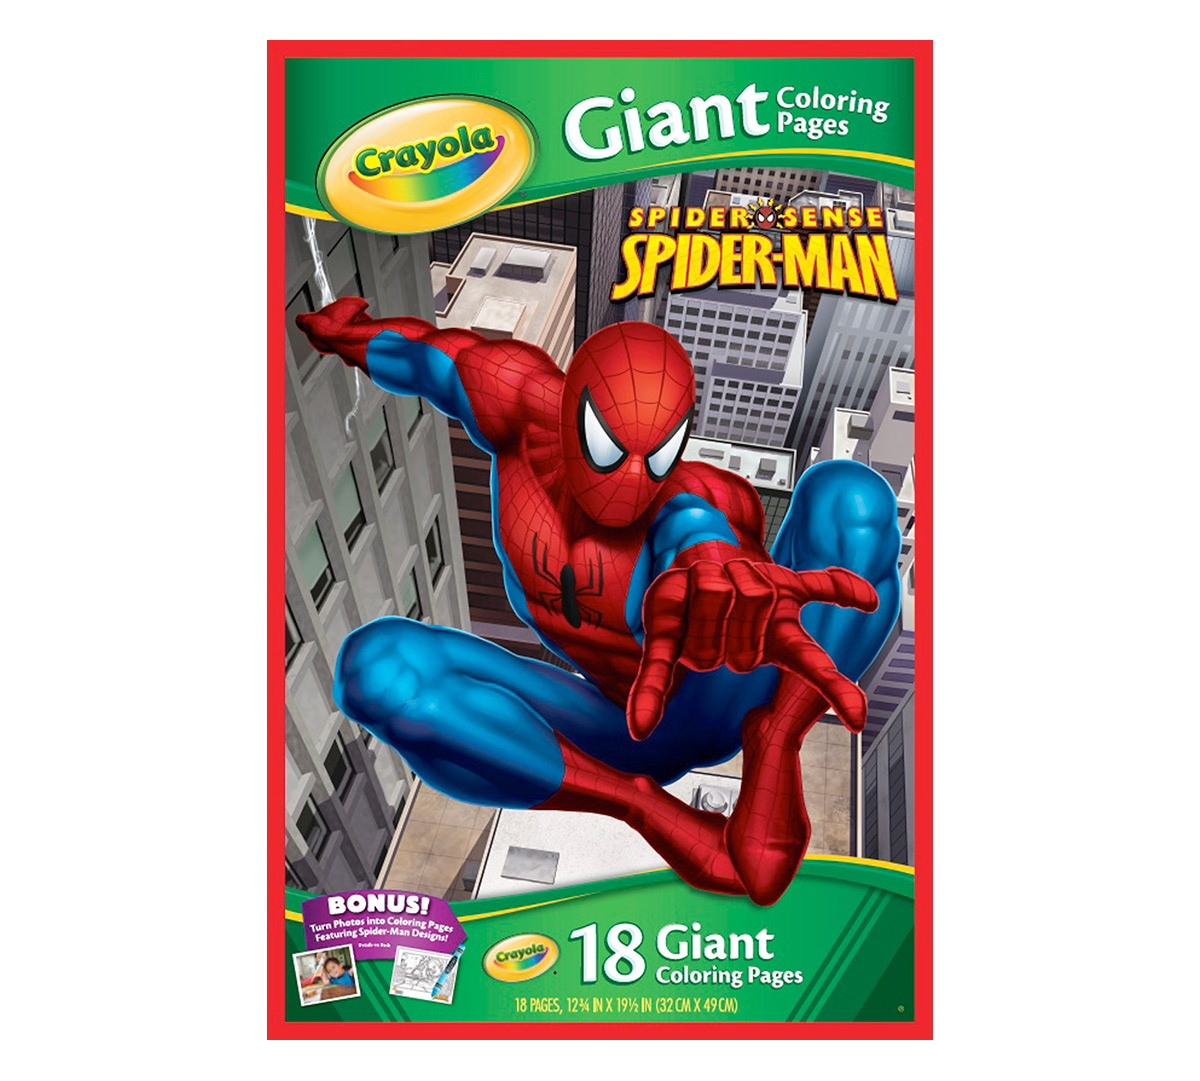 660 Crayola Giant Coloring Pages Spiderman Download Free Images